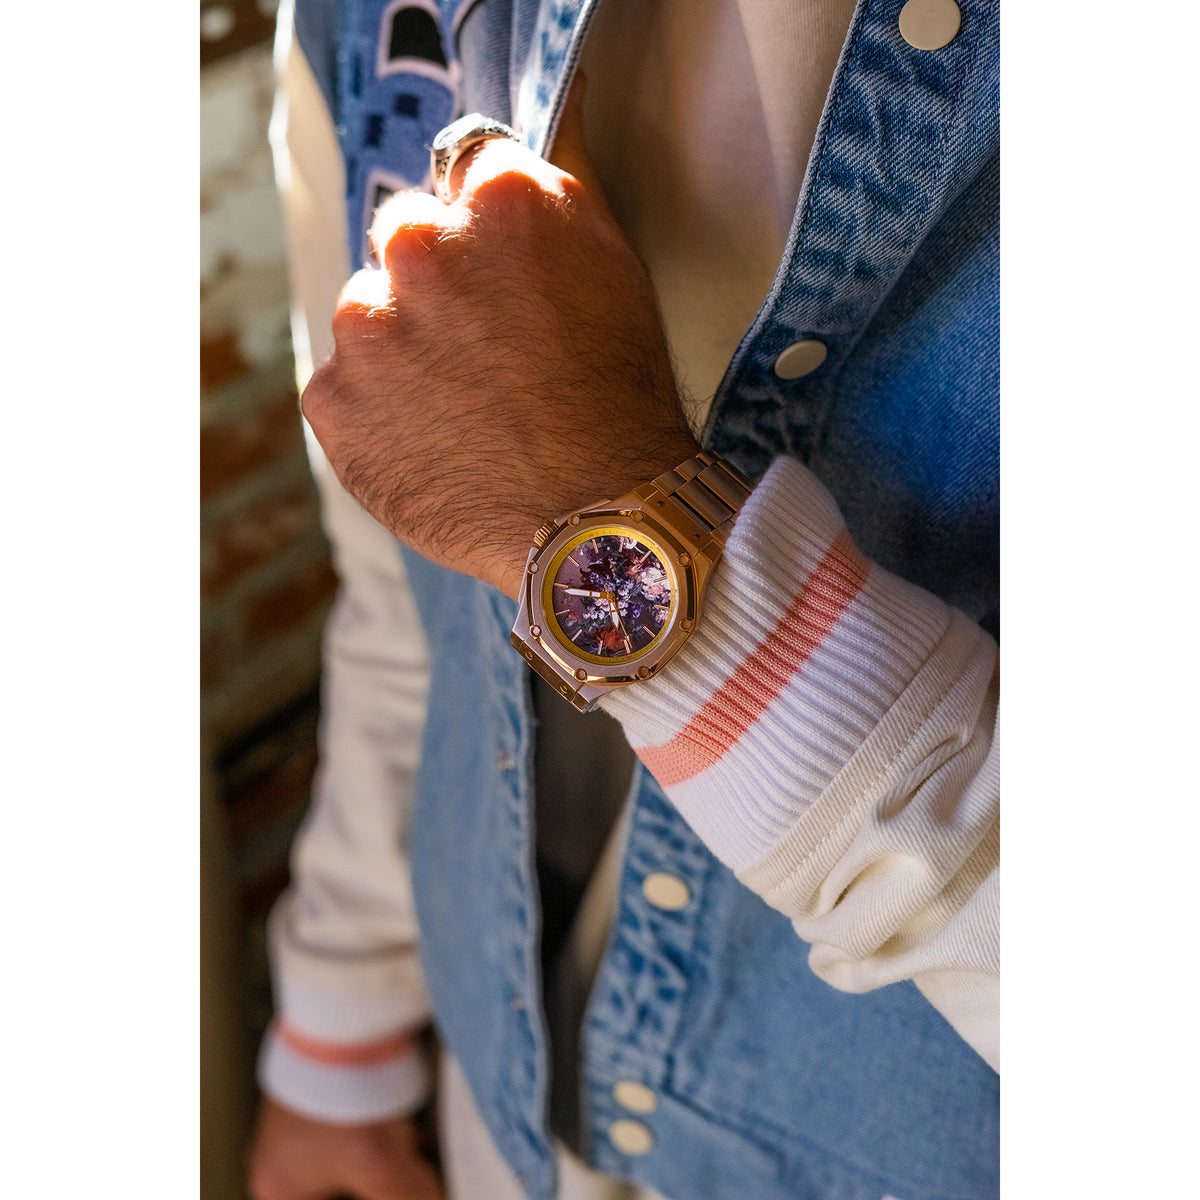 Van Huysum Vase of Flowers Watch with Rose Gold Band